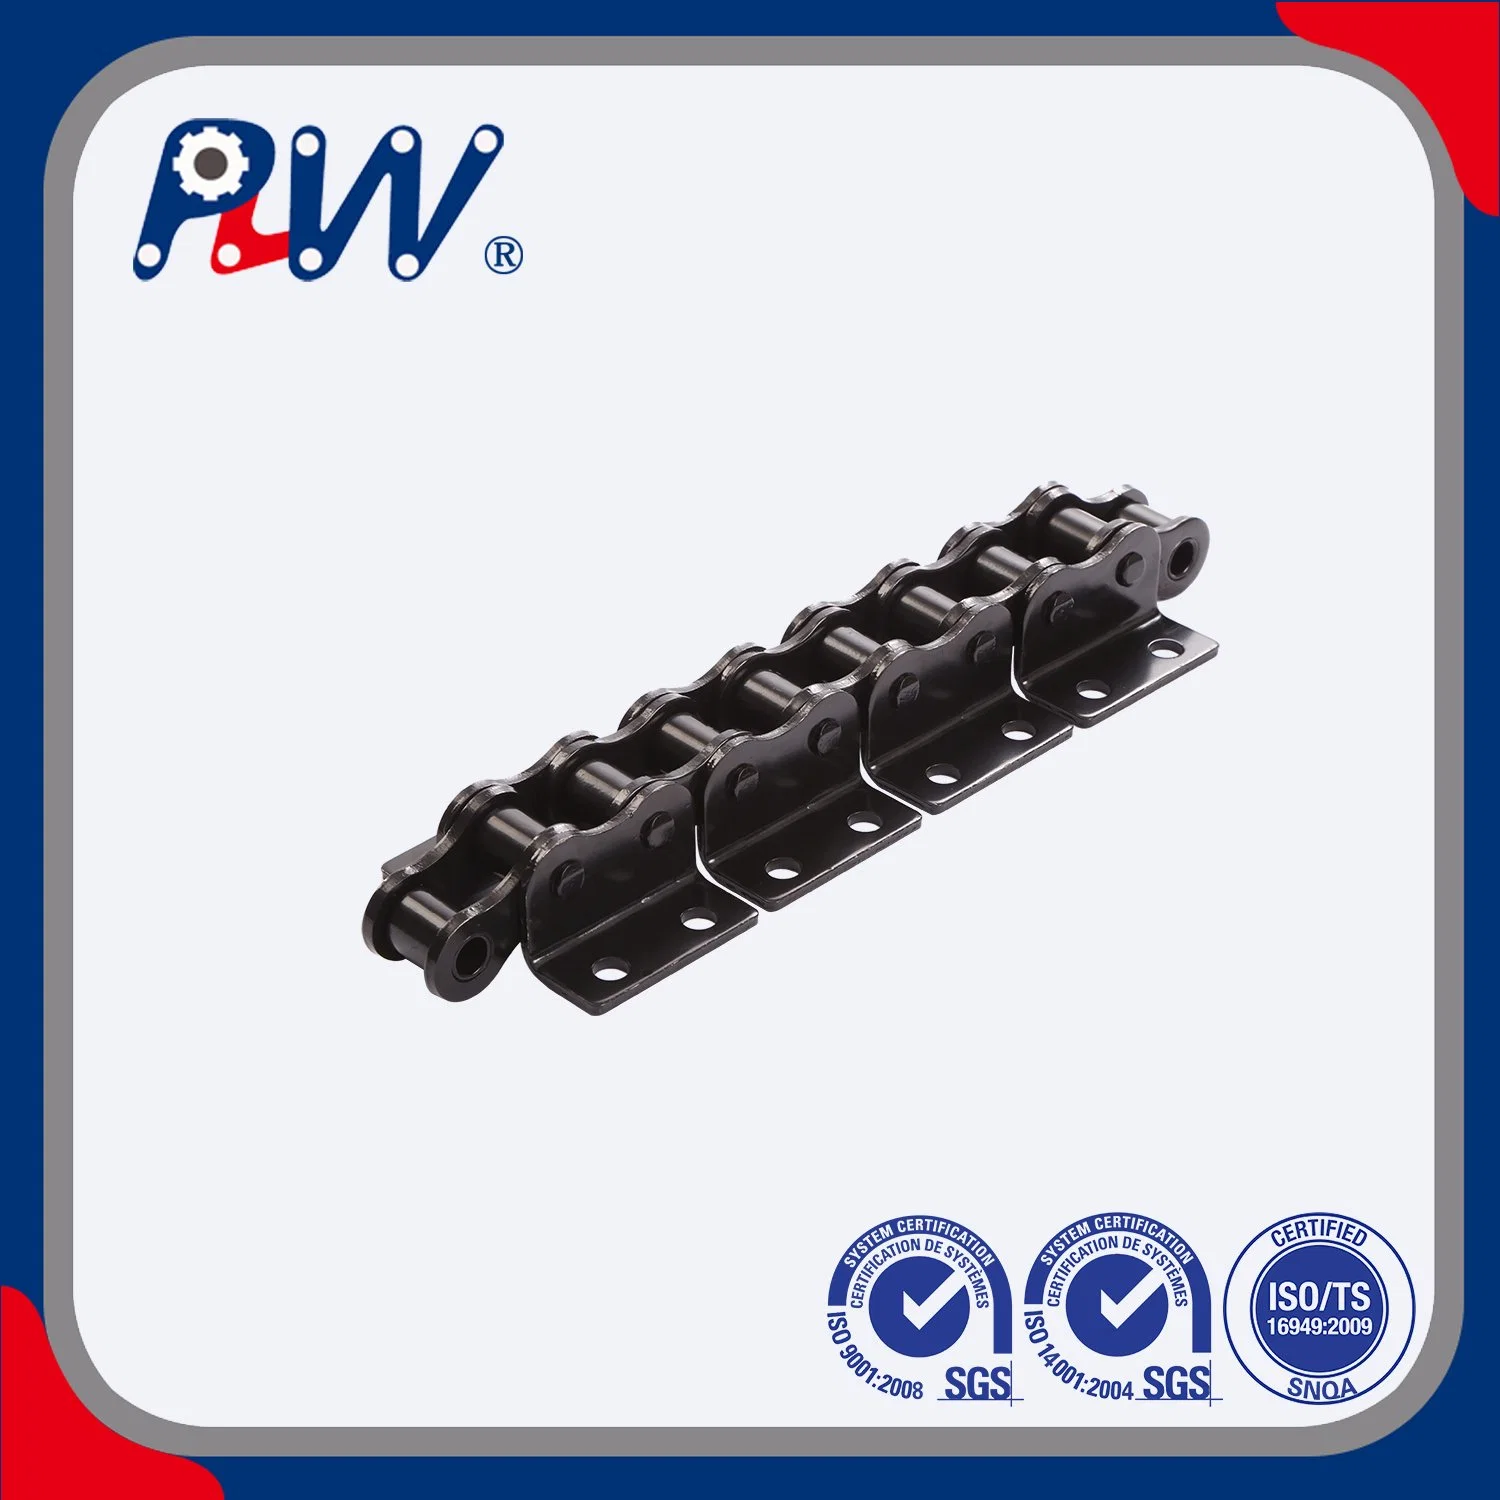 Plastic Bag+Carton Box+Plywood Case Alloy Made-to-Order 40, 50 Motorcycle Parts Roller Chain